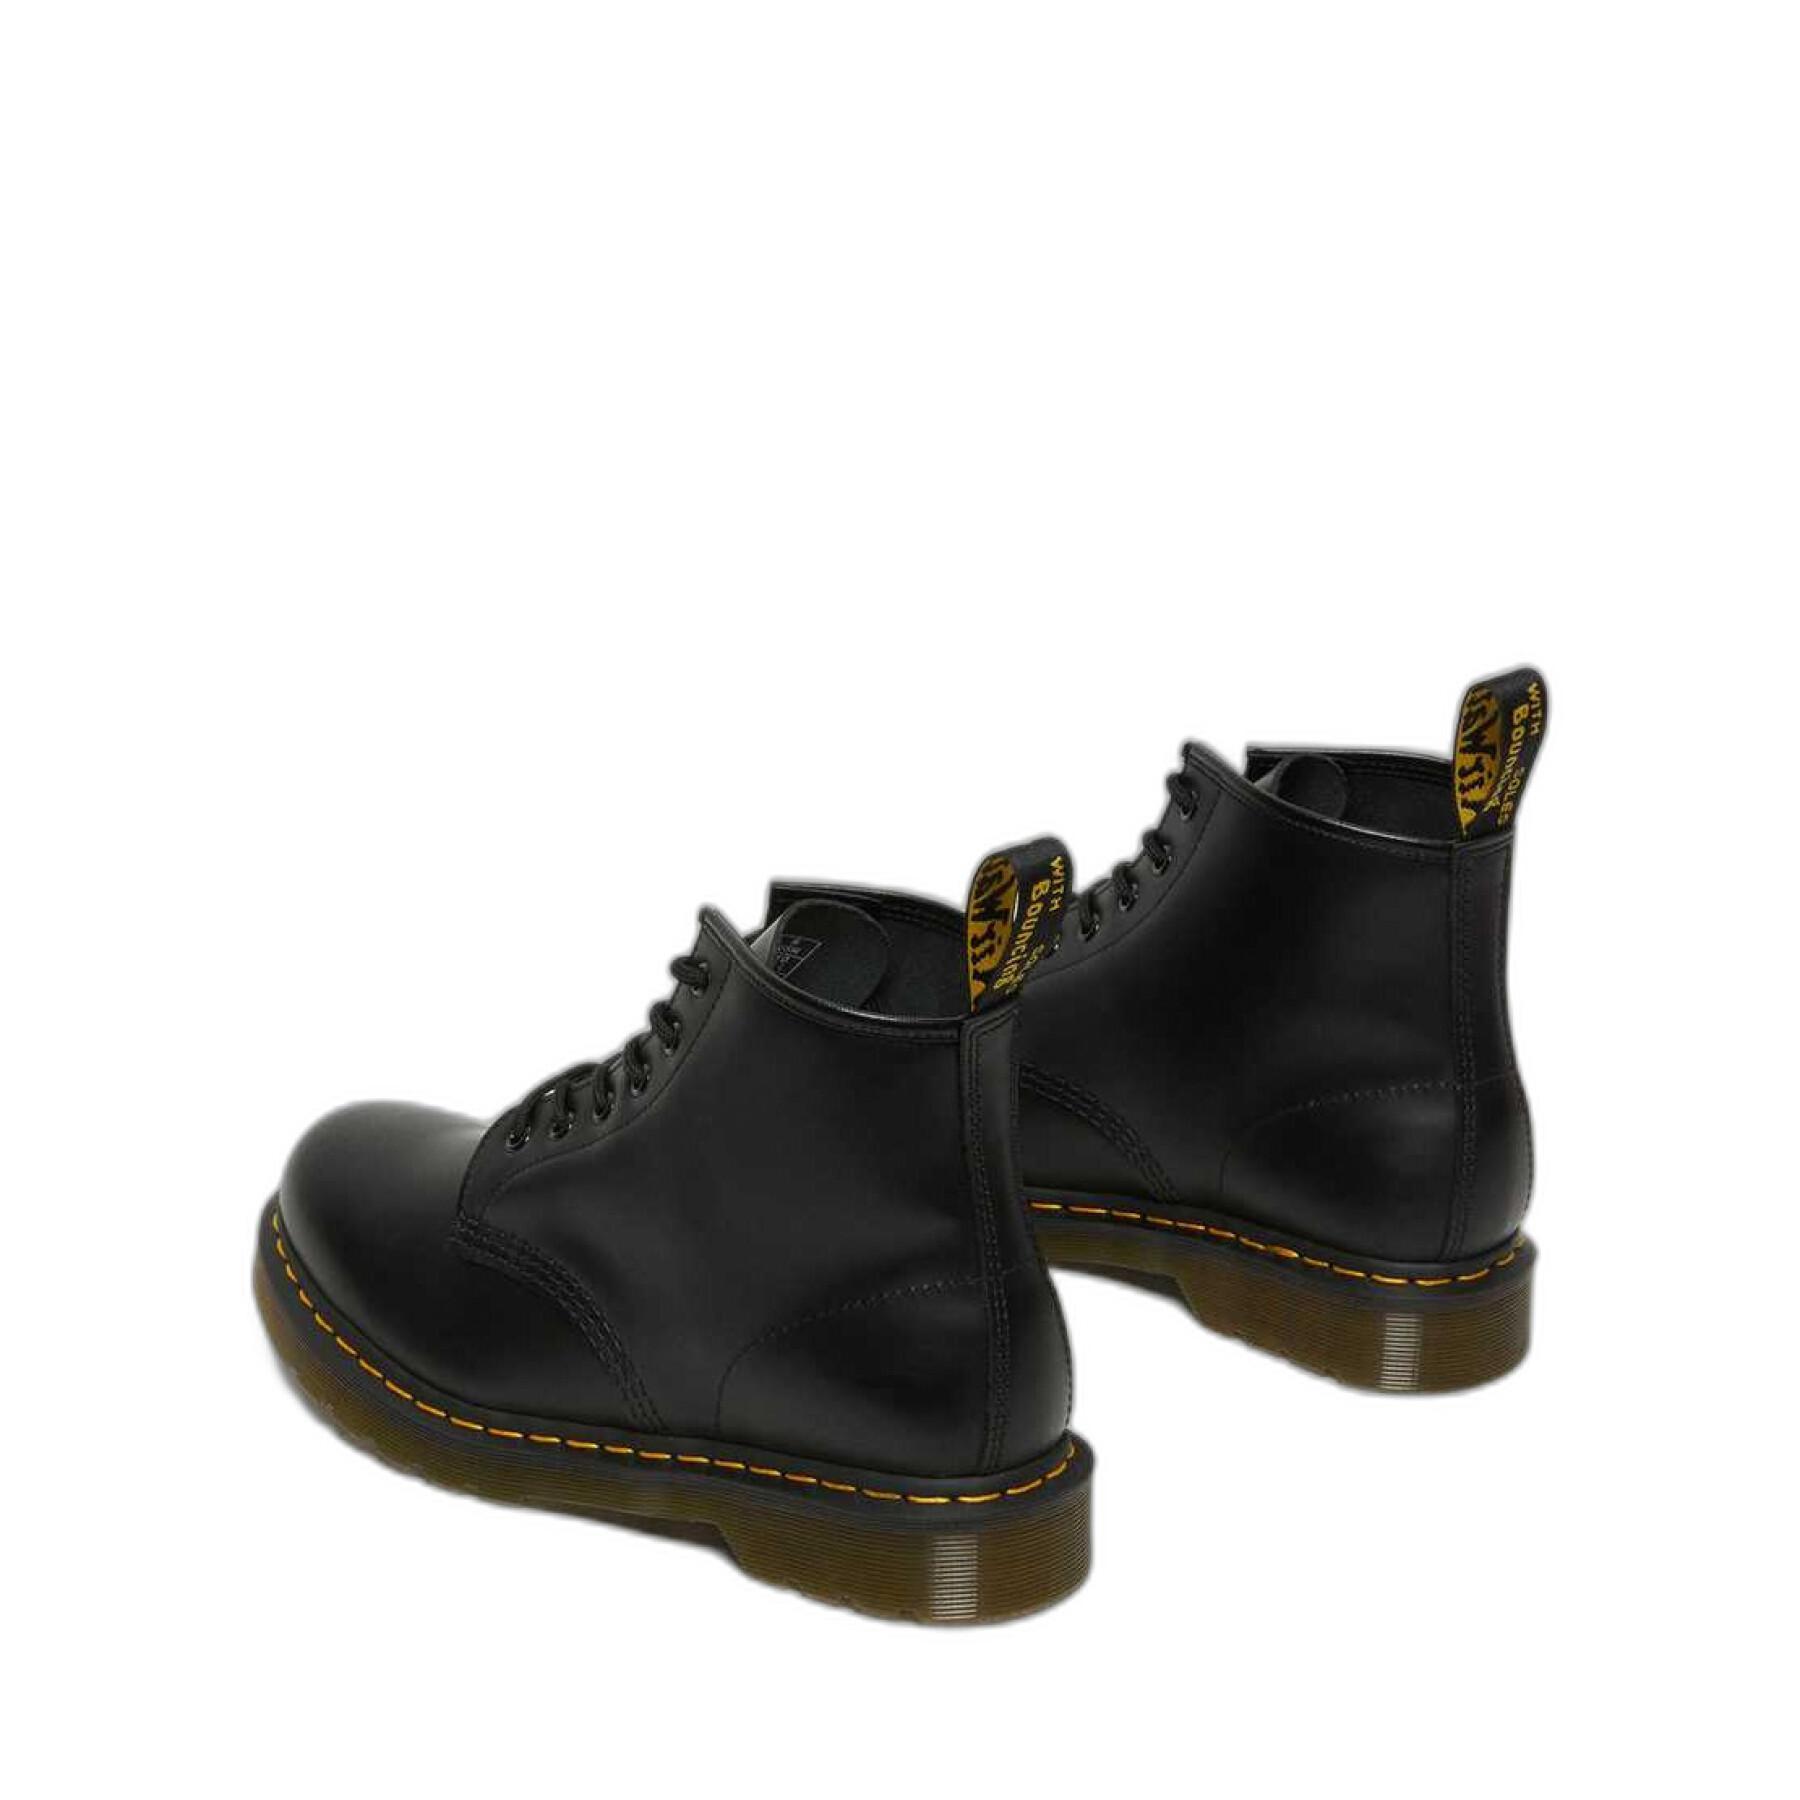 Stivali Dr Martens 101 Smooth Lace Up